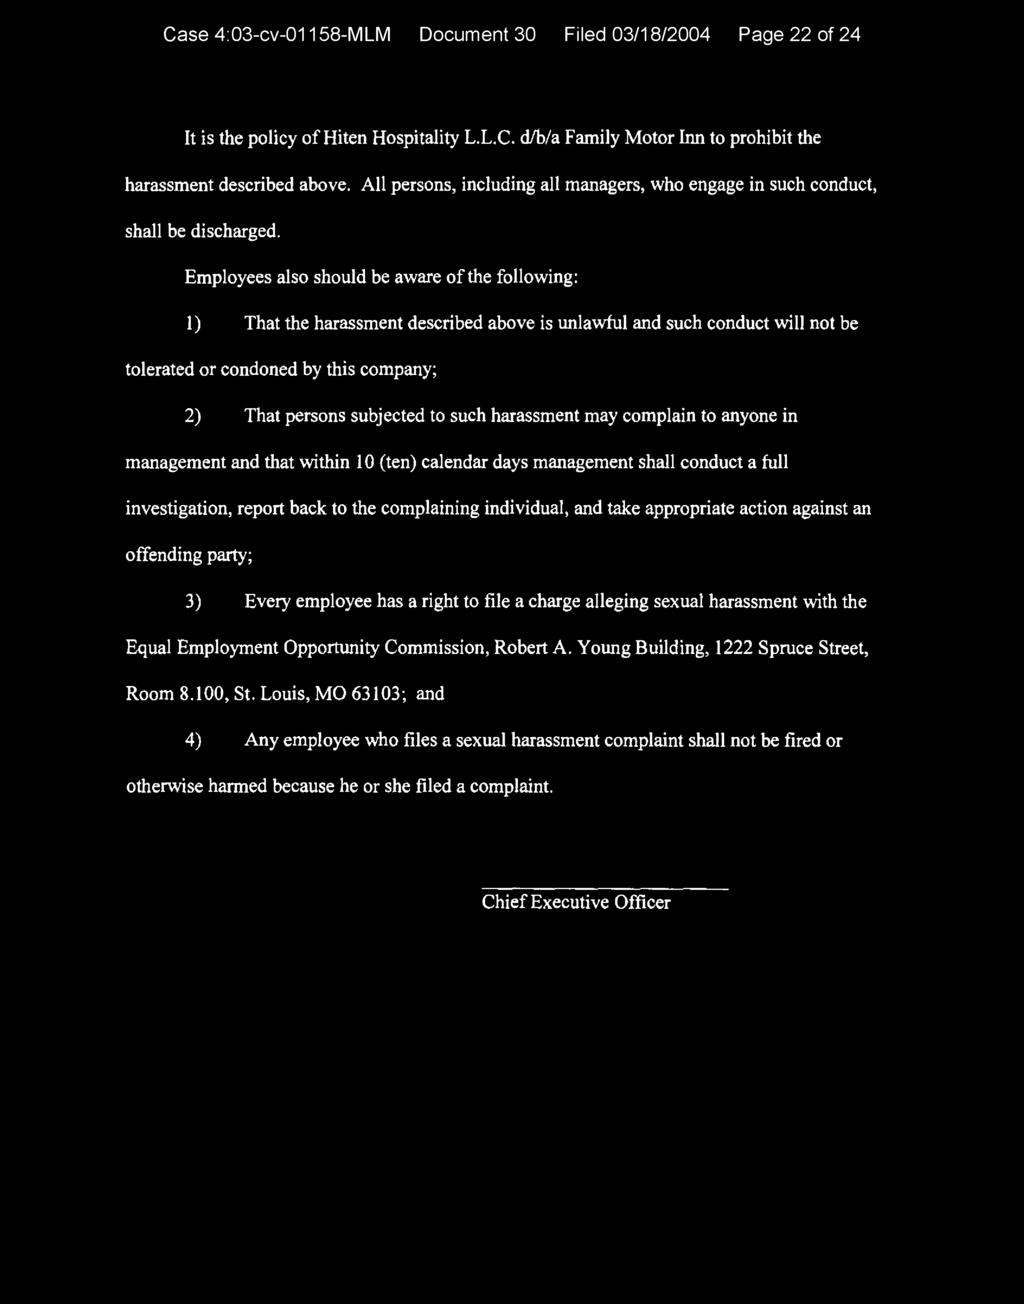 Case 4:03-cv-01158-MLM Document 30 Filed 03/18/2004 Page 22 of 24 It is the policy of Hiten Hospitality L.L.C. d/b/a Family Motor Inn to prohibit the harassment described above.